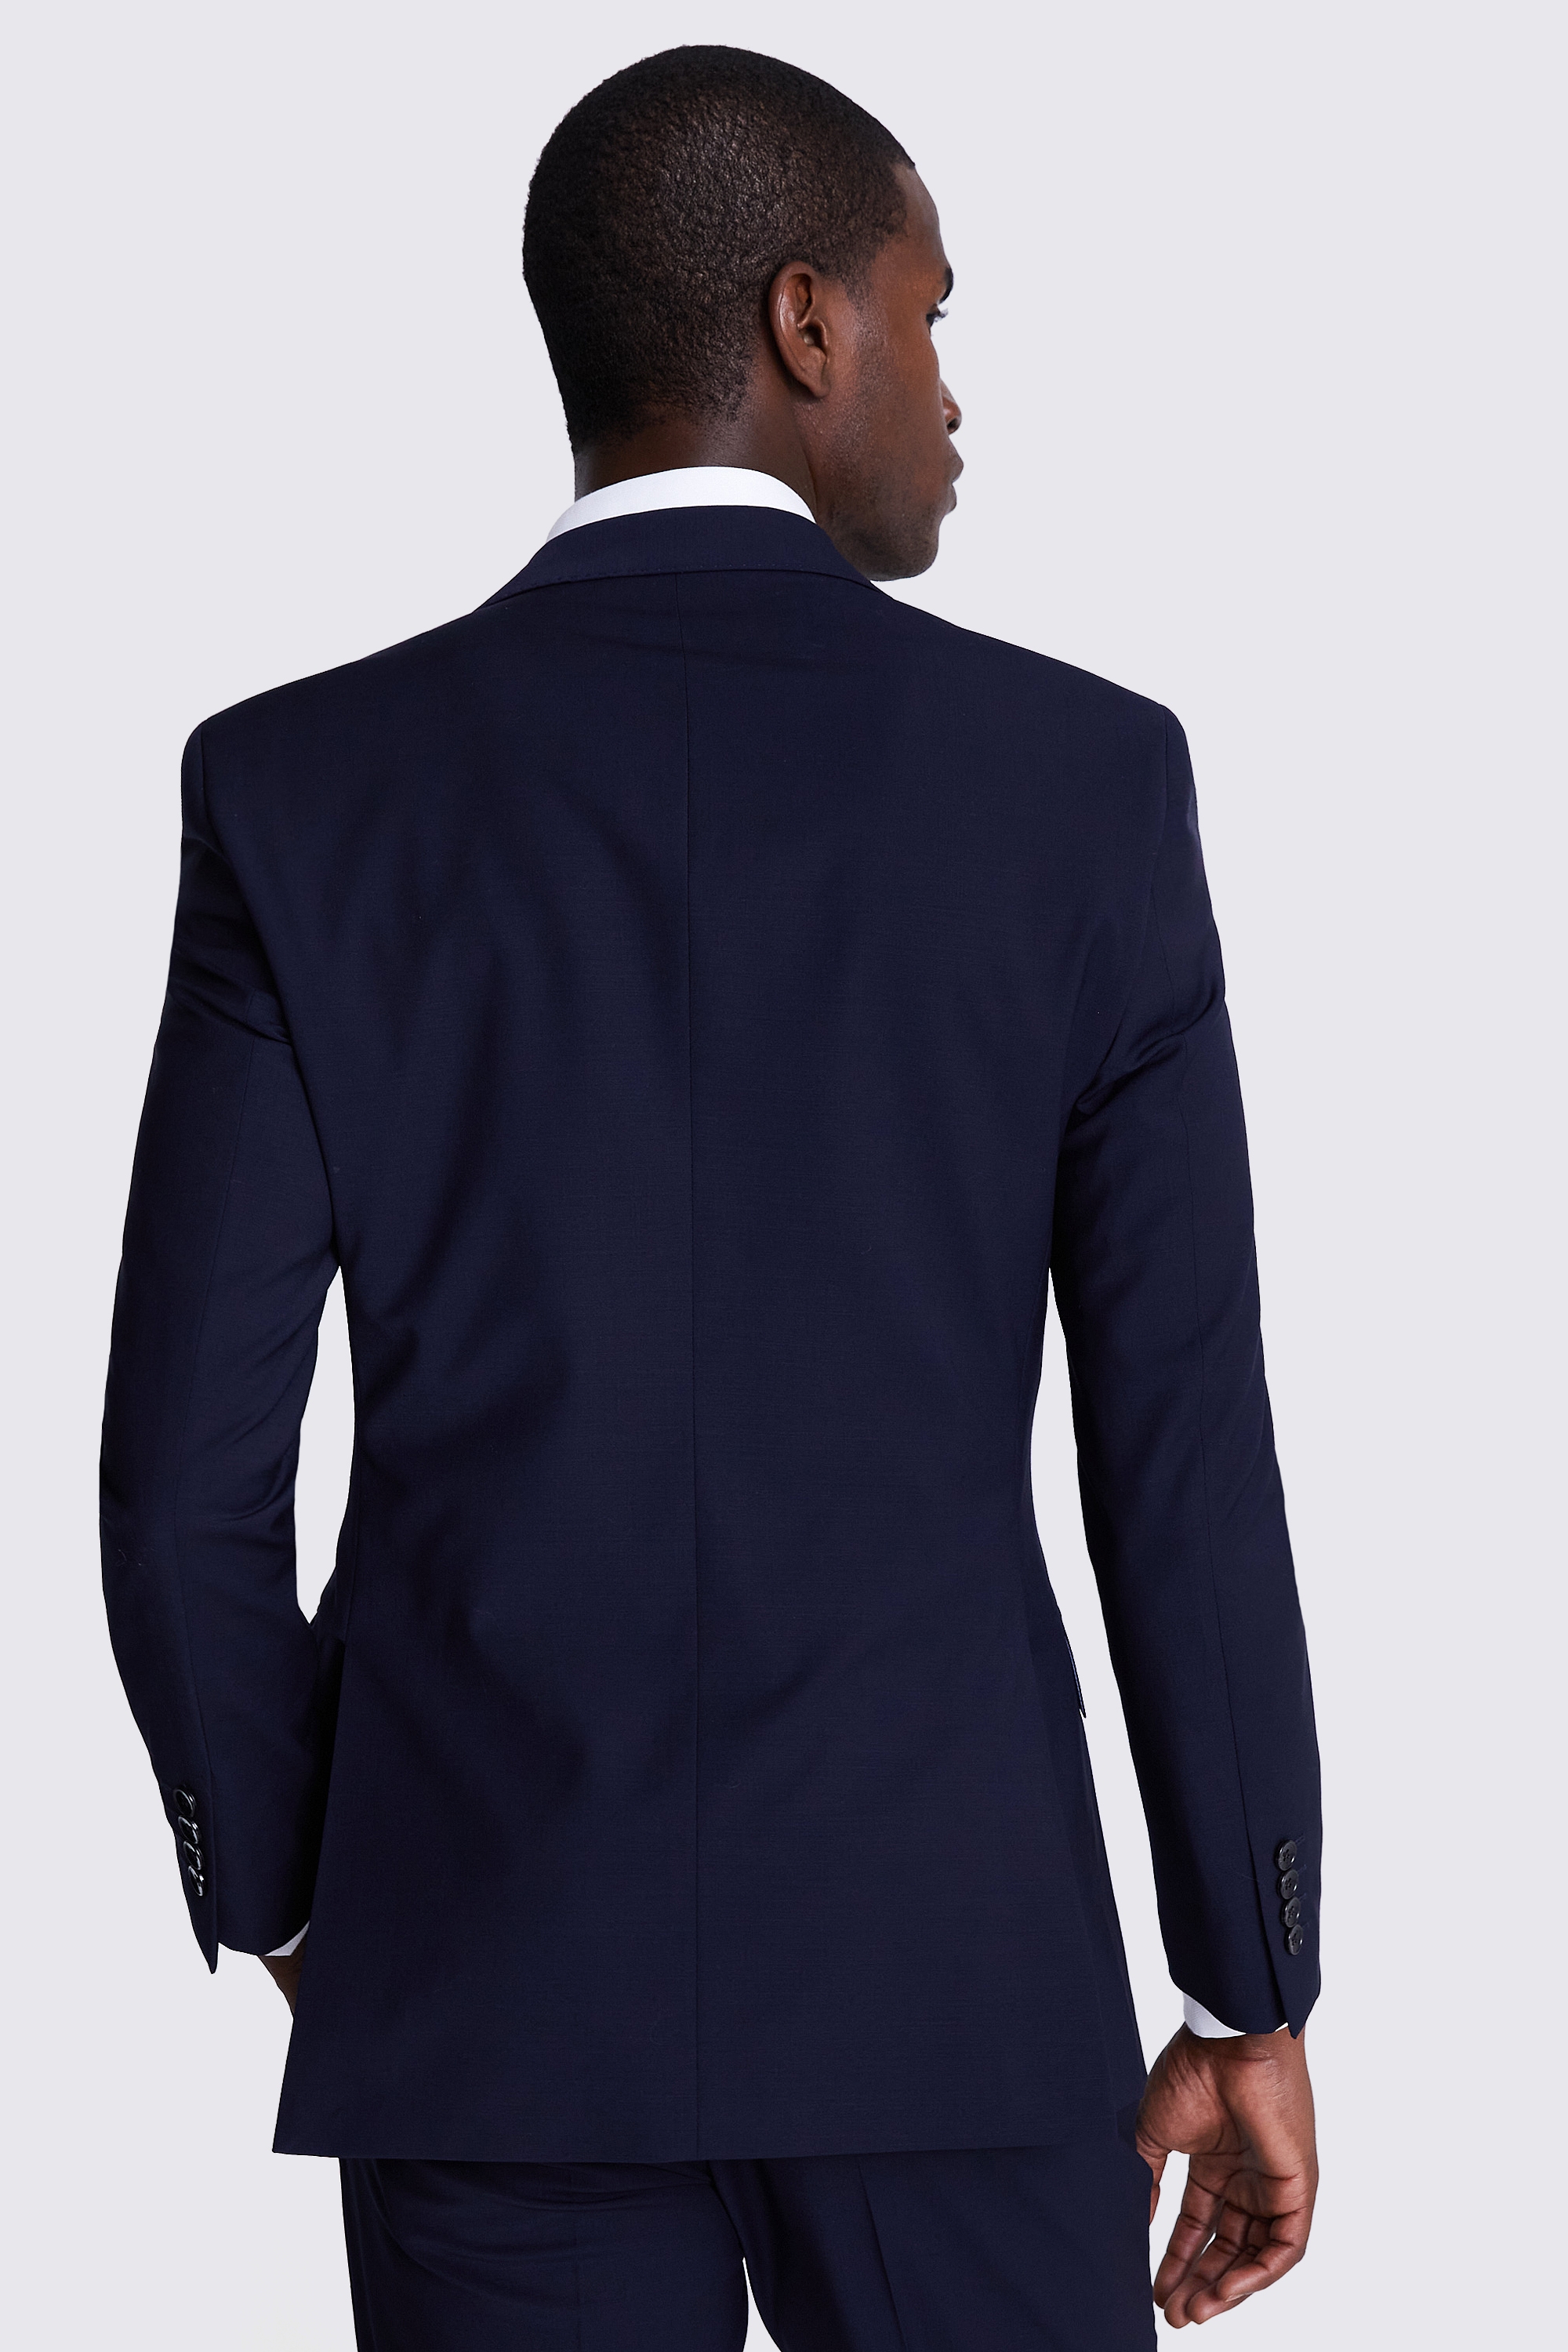 Tailored Fit Navy Performance Jacket | Buy Online at Moss